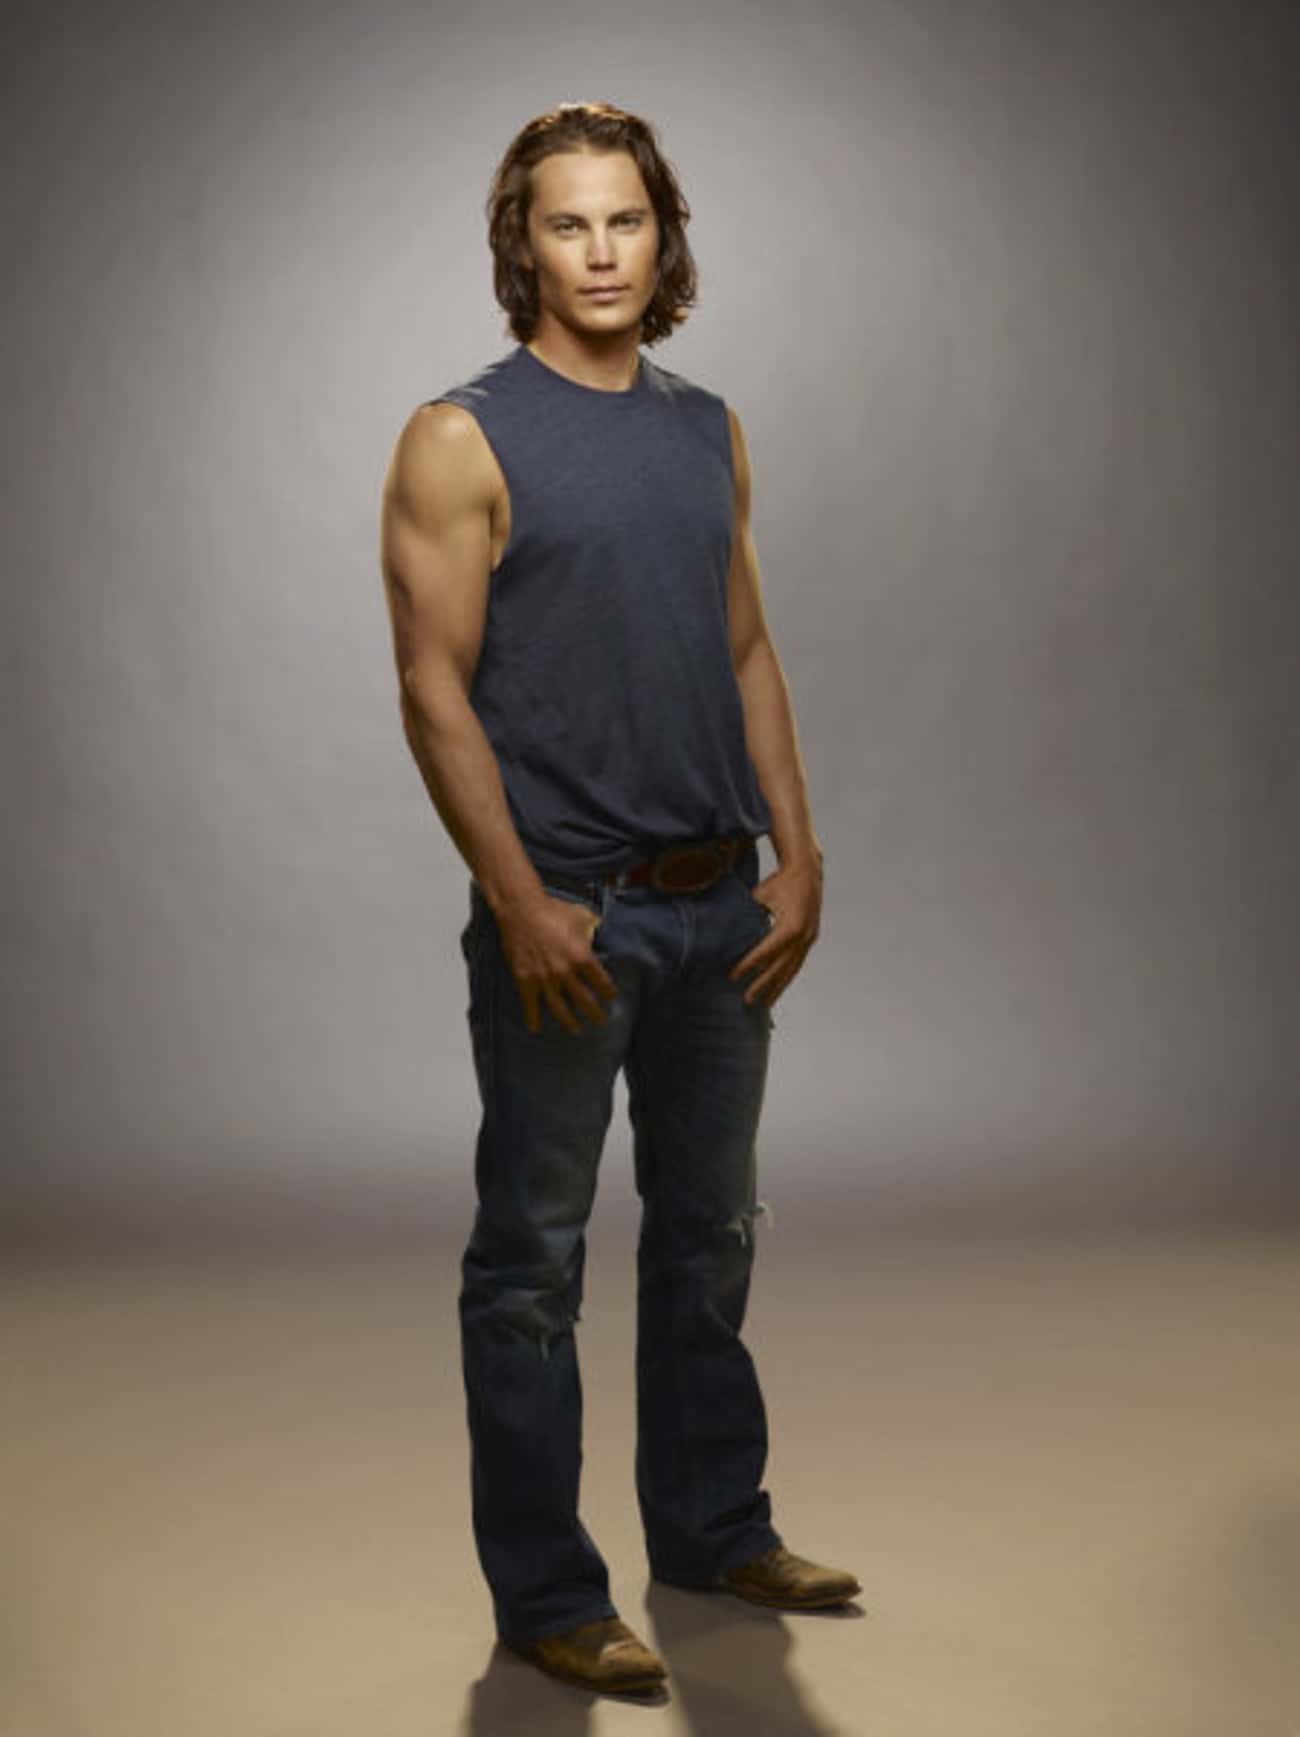 Taylor Kitsch in Gray Vest with Slim Fit Jeans